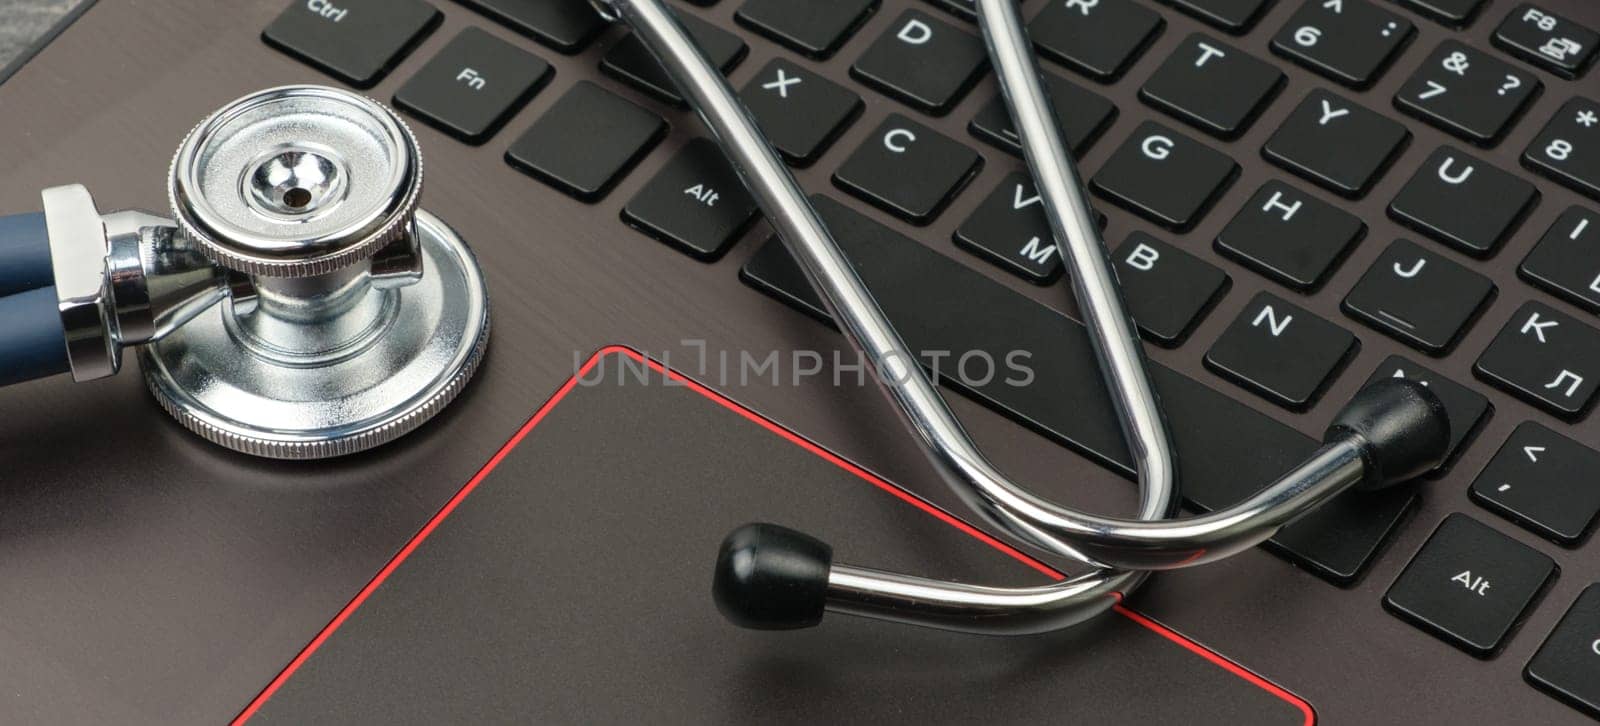 Silver stethoscope on a modern laptop keyboard. Medical concept